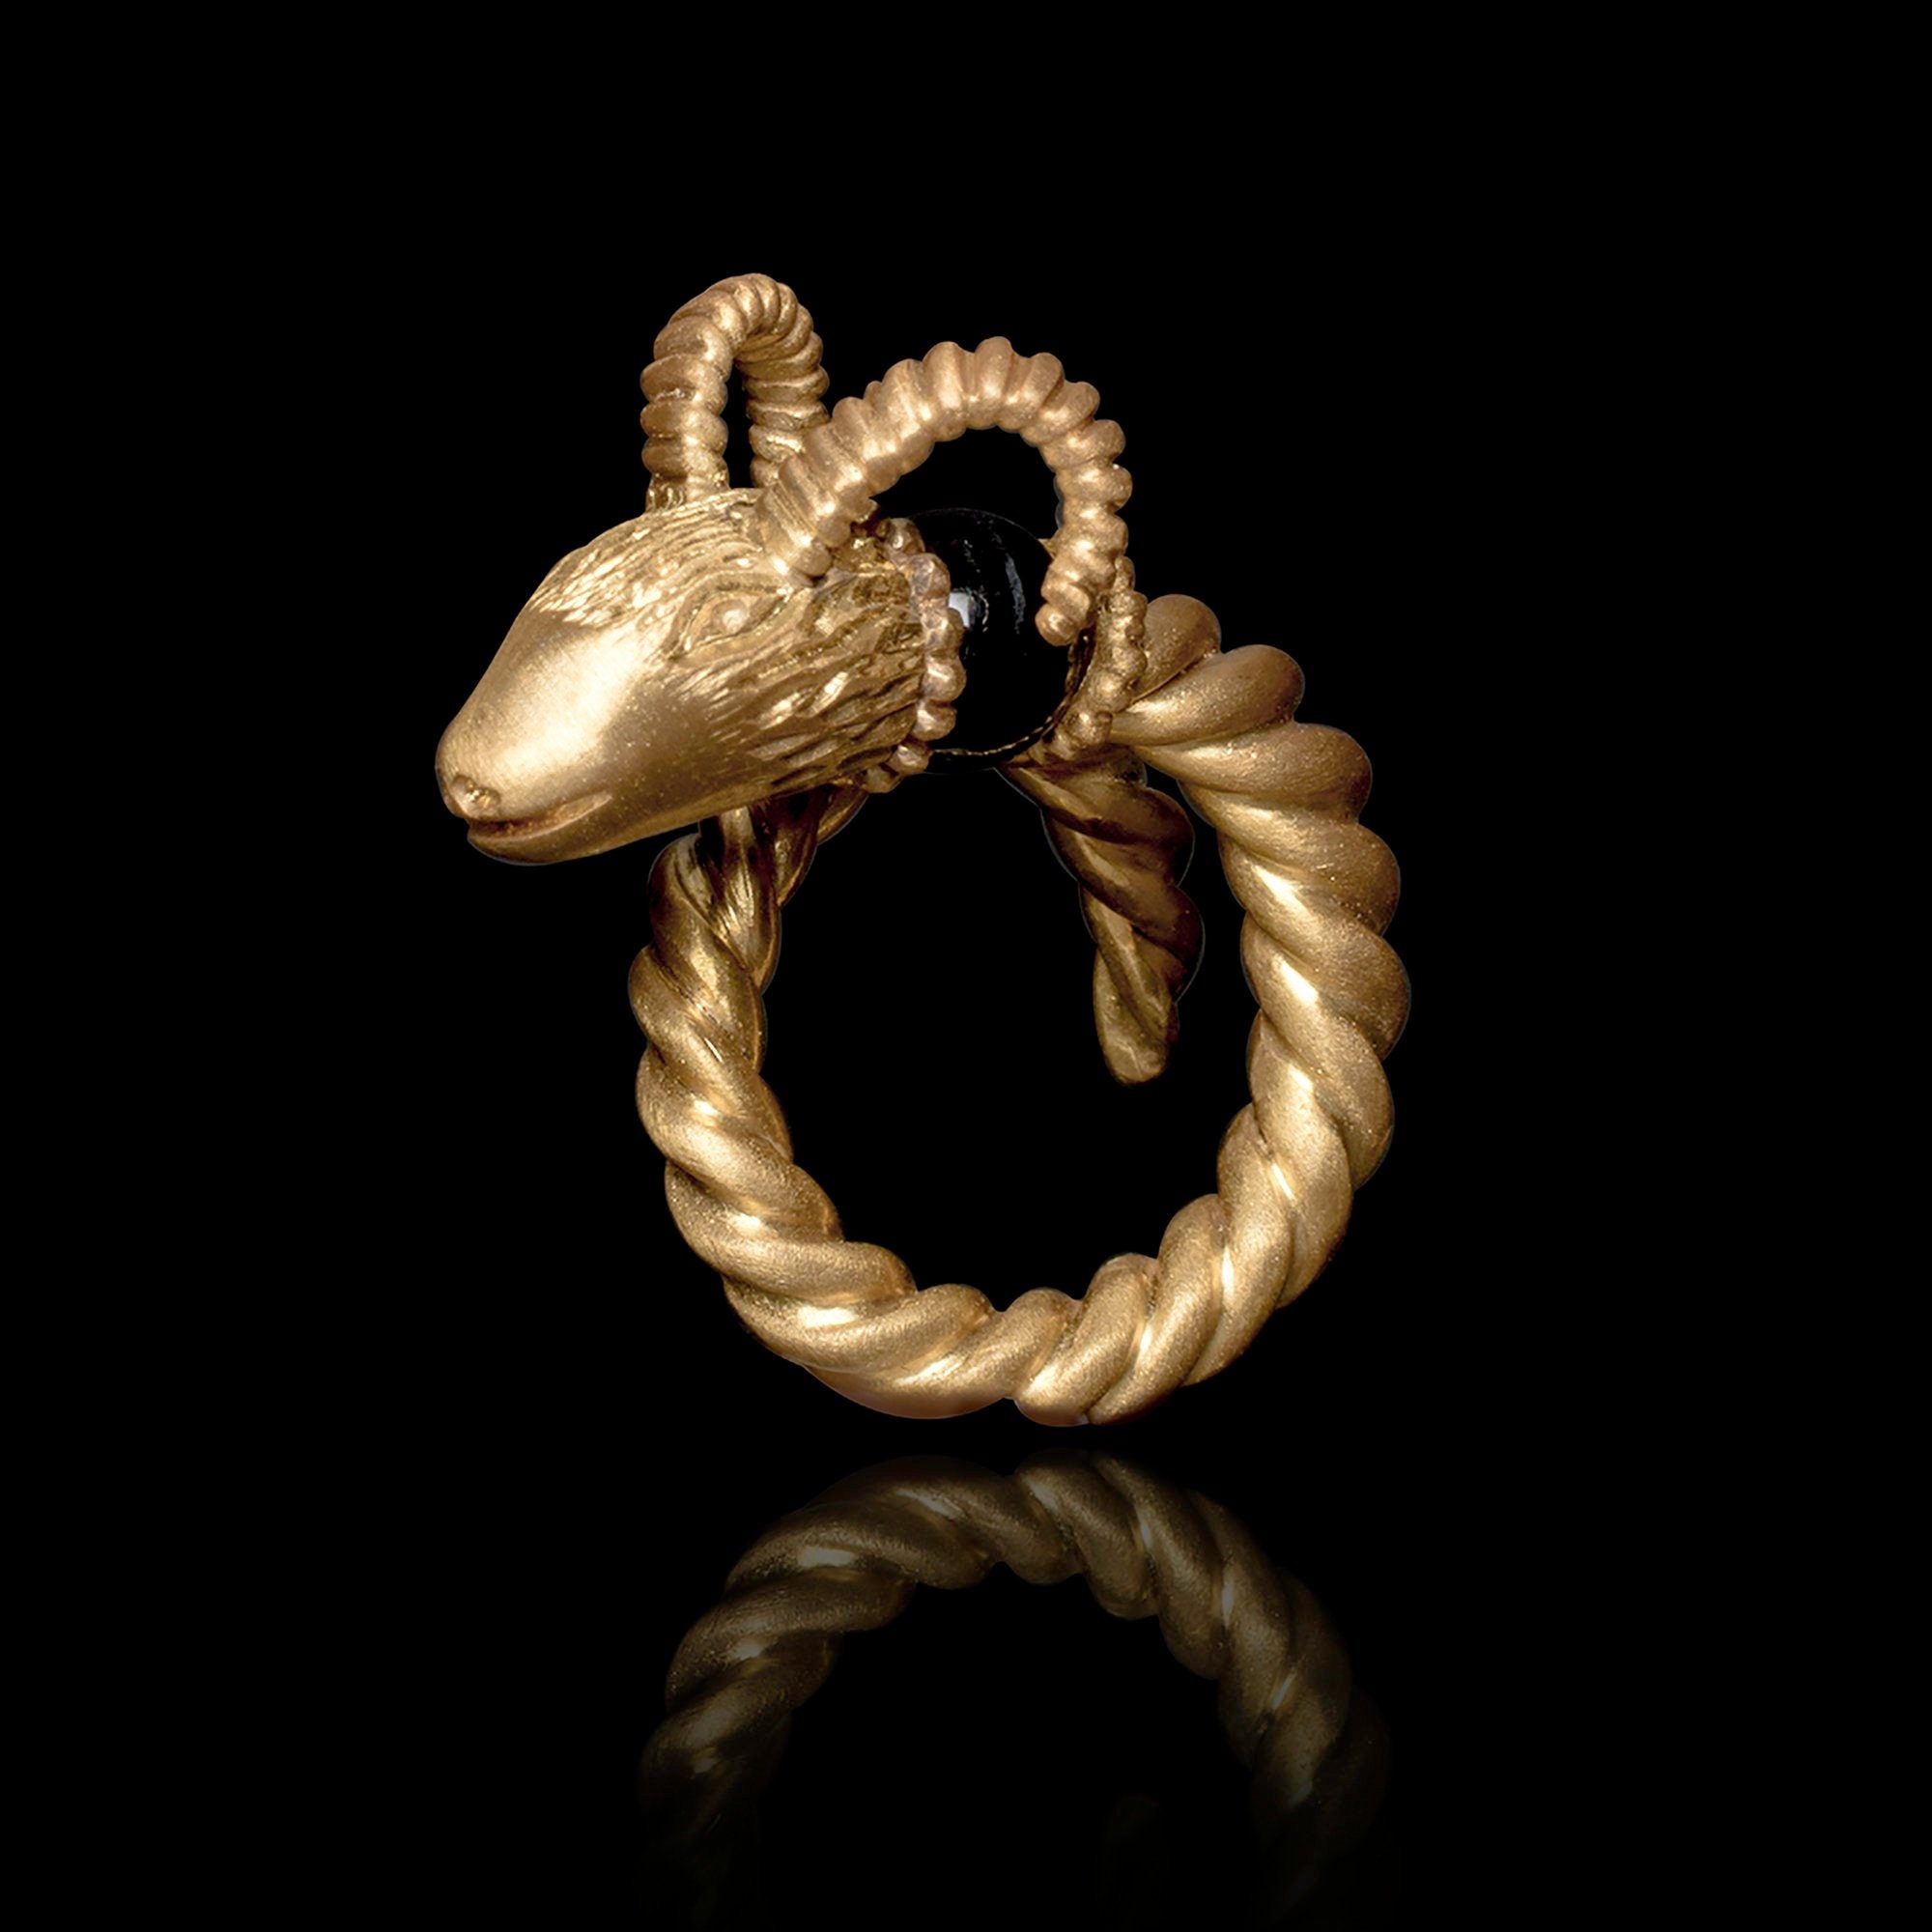 Aries, Ram, Goat Gold Ring, Goat Head Ring, Capricorn, Animal Jewelry, Ancient Greek Inspired, Dionysiac Traditions, Jewels